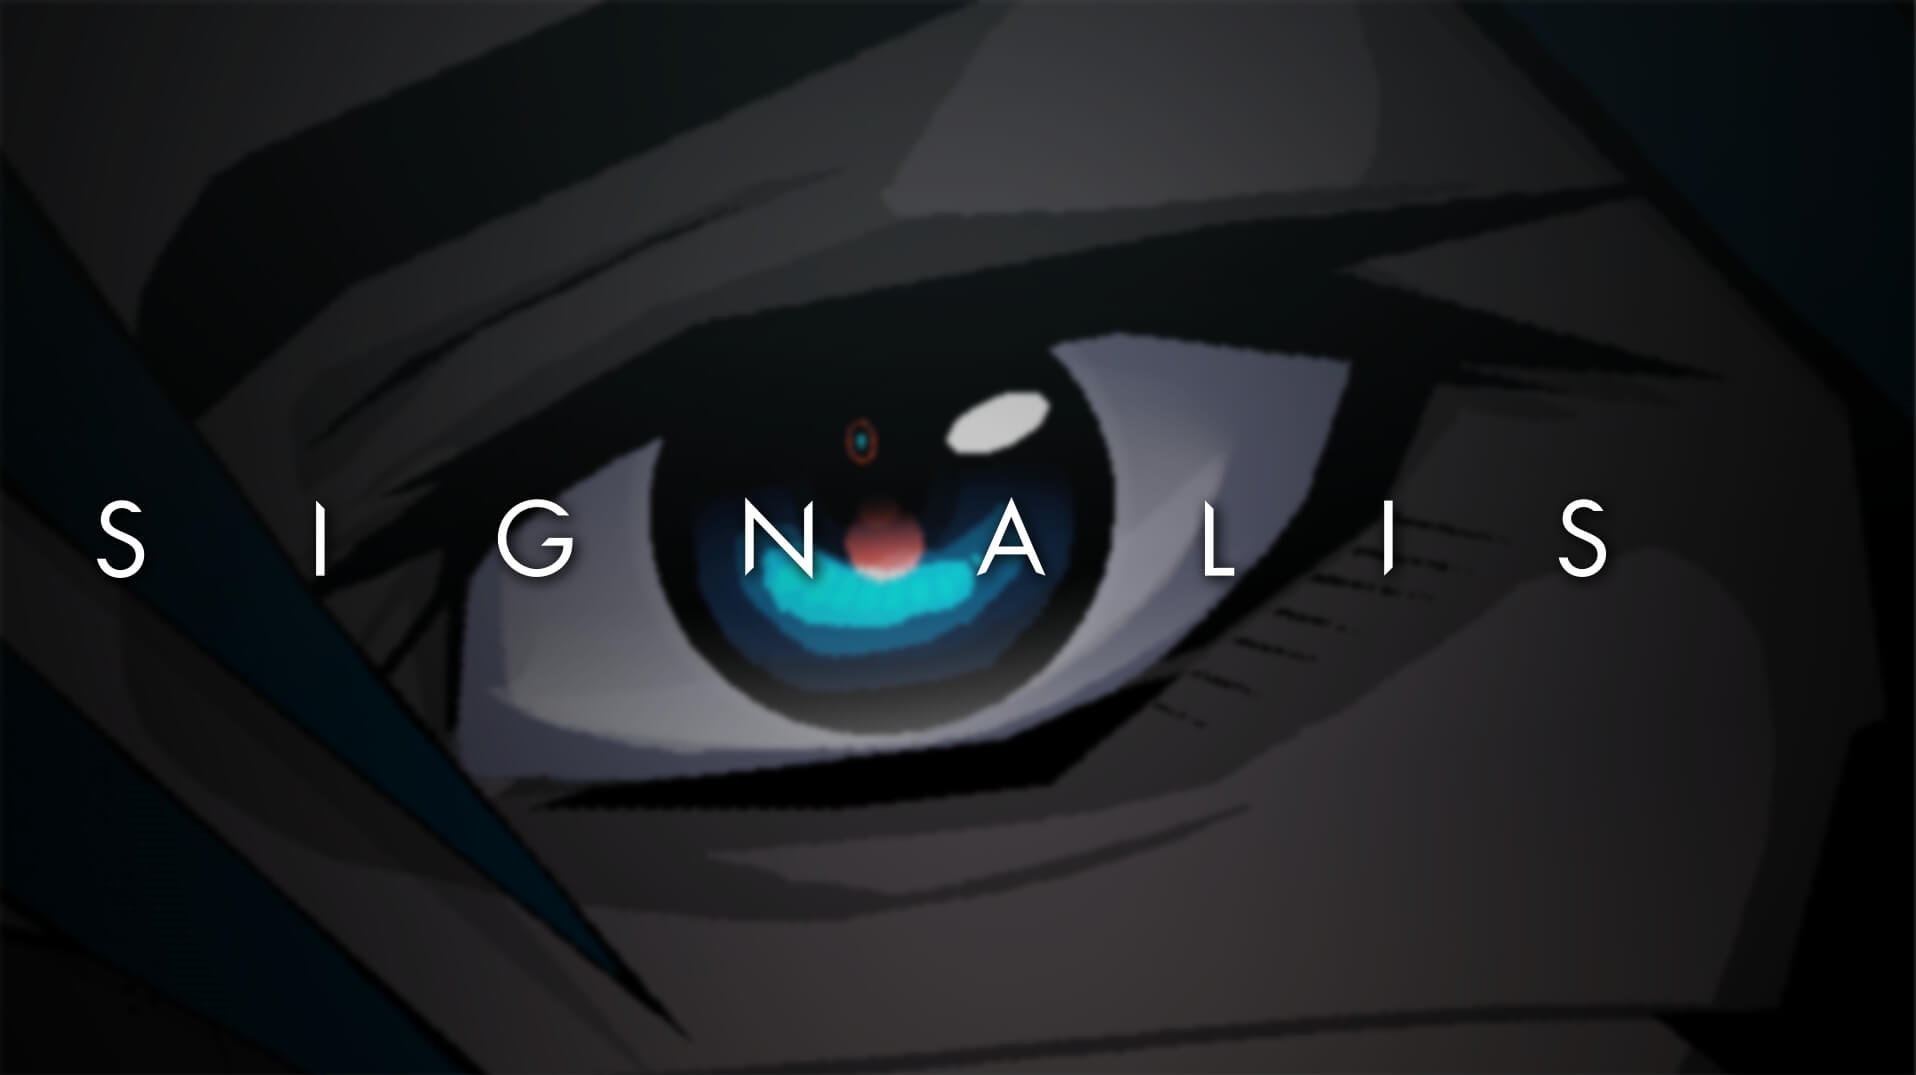 SIGNALIS is coming to Xbox One